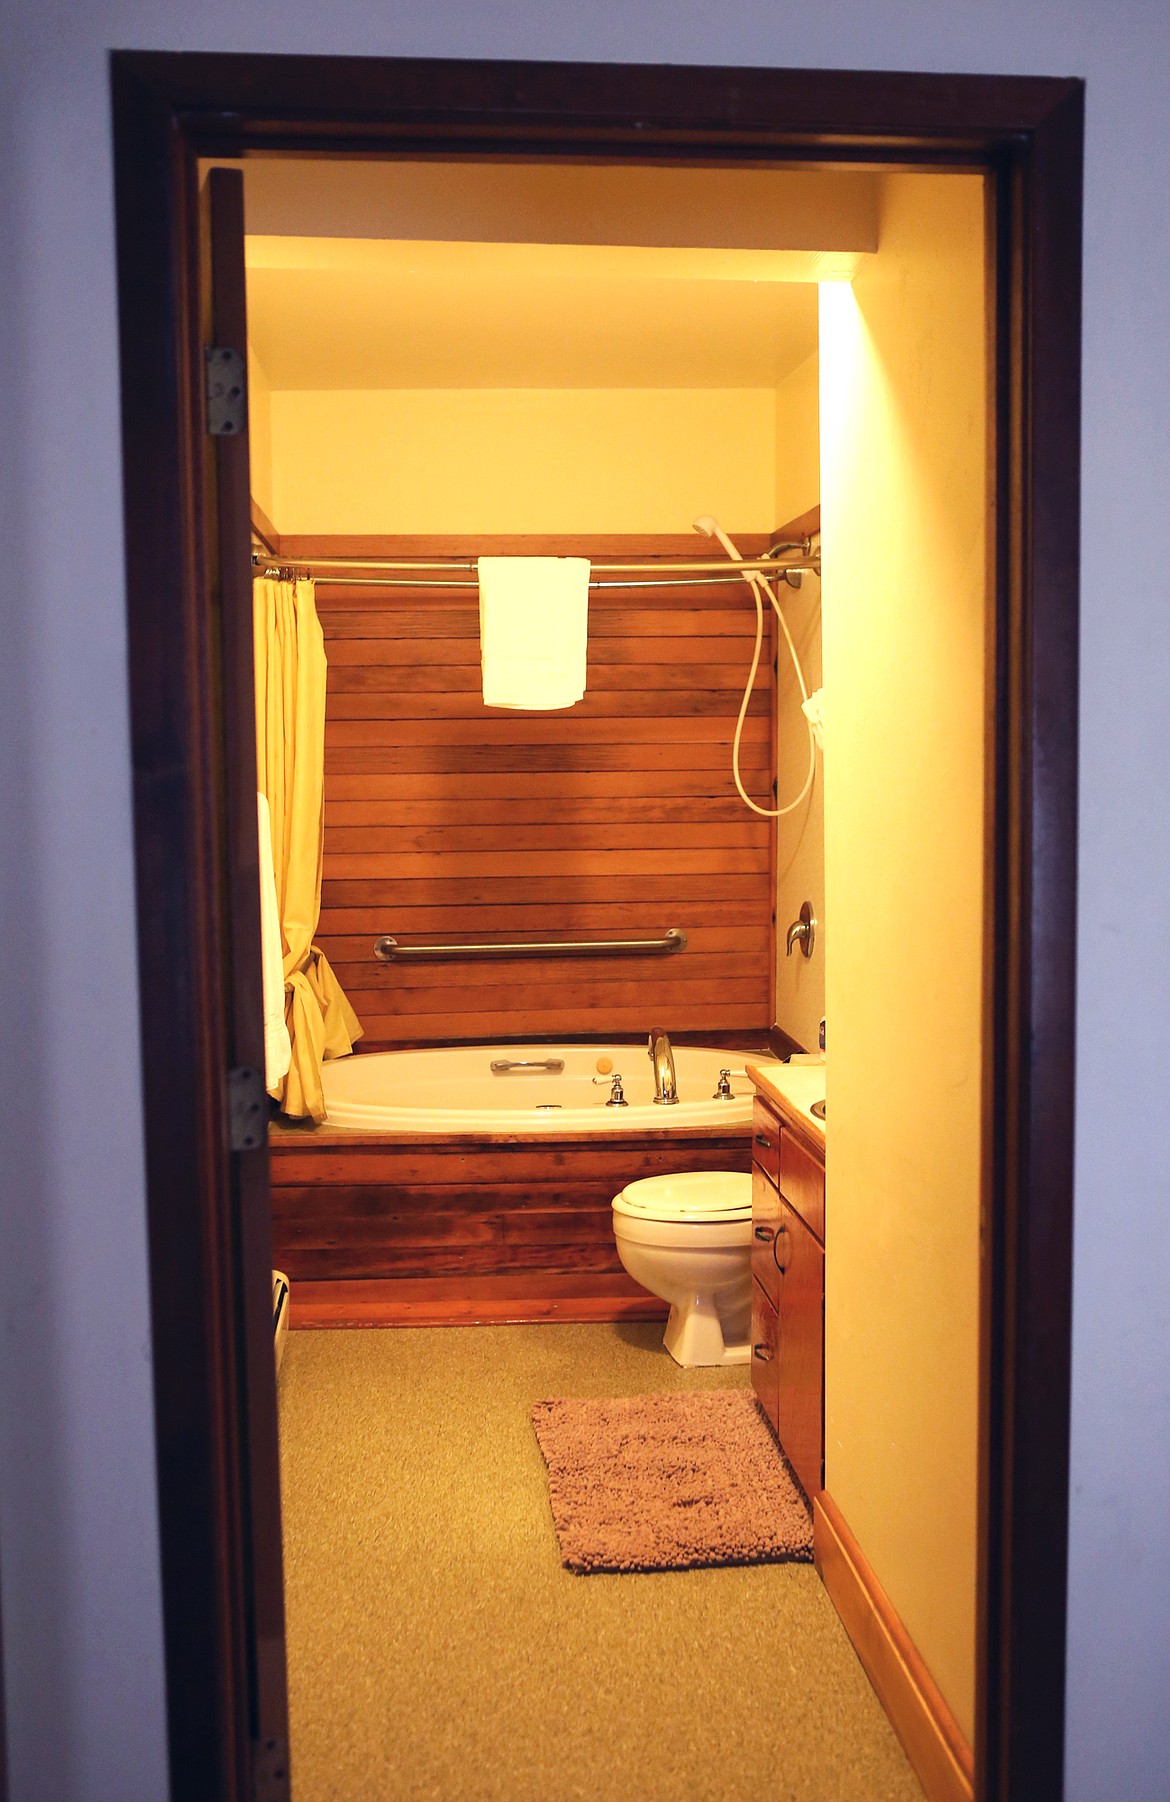 The bathrooms in units at Alameda&#146;s Hot Springs Retreat feature large tubs that can be filled with mineral waters straight from local hot springs. (Mackenzie Reiss/Daily Inter Lake)